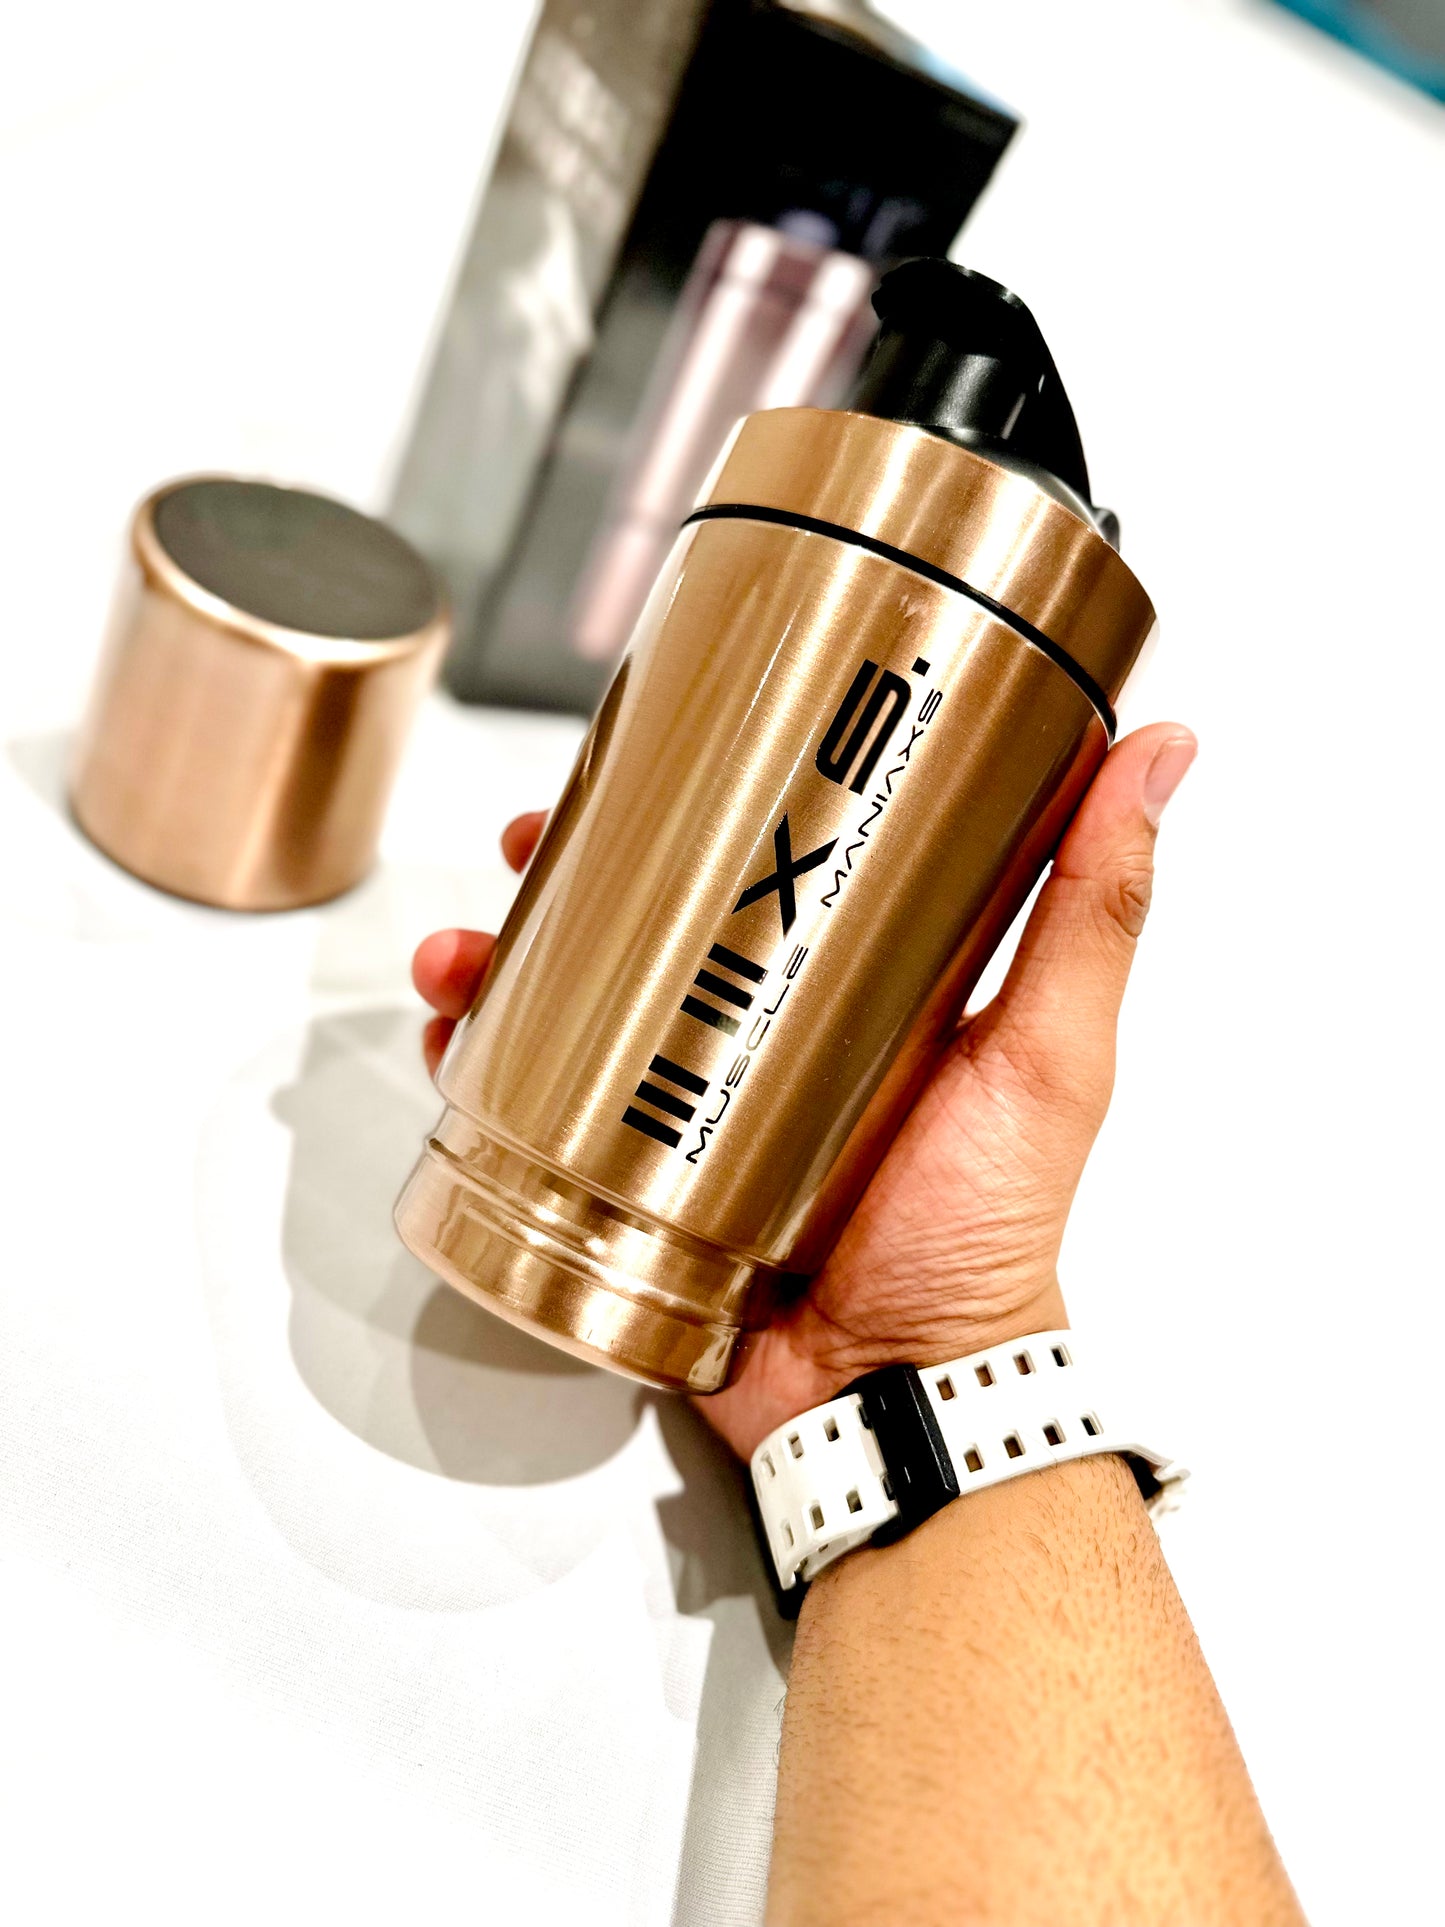 GOLD SERIES HARD STEEL SHAKER (LIMITED EDITION)